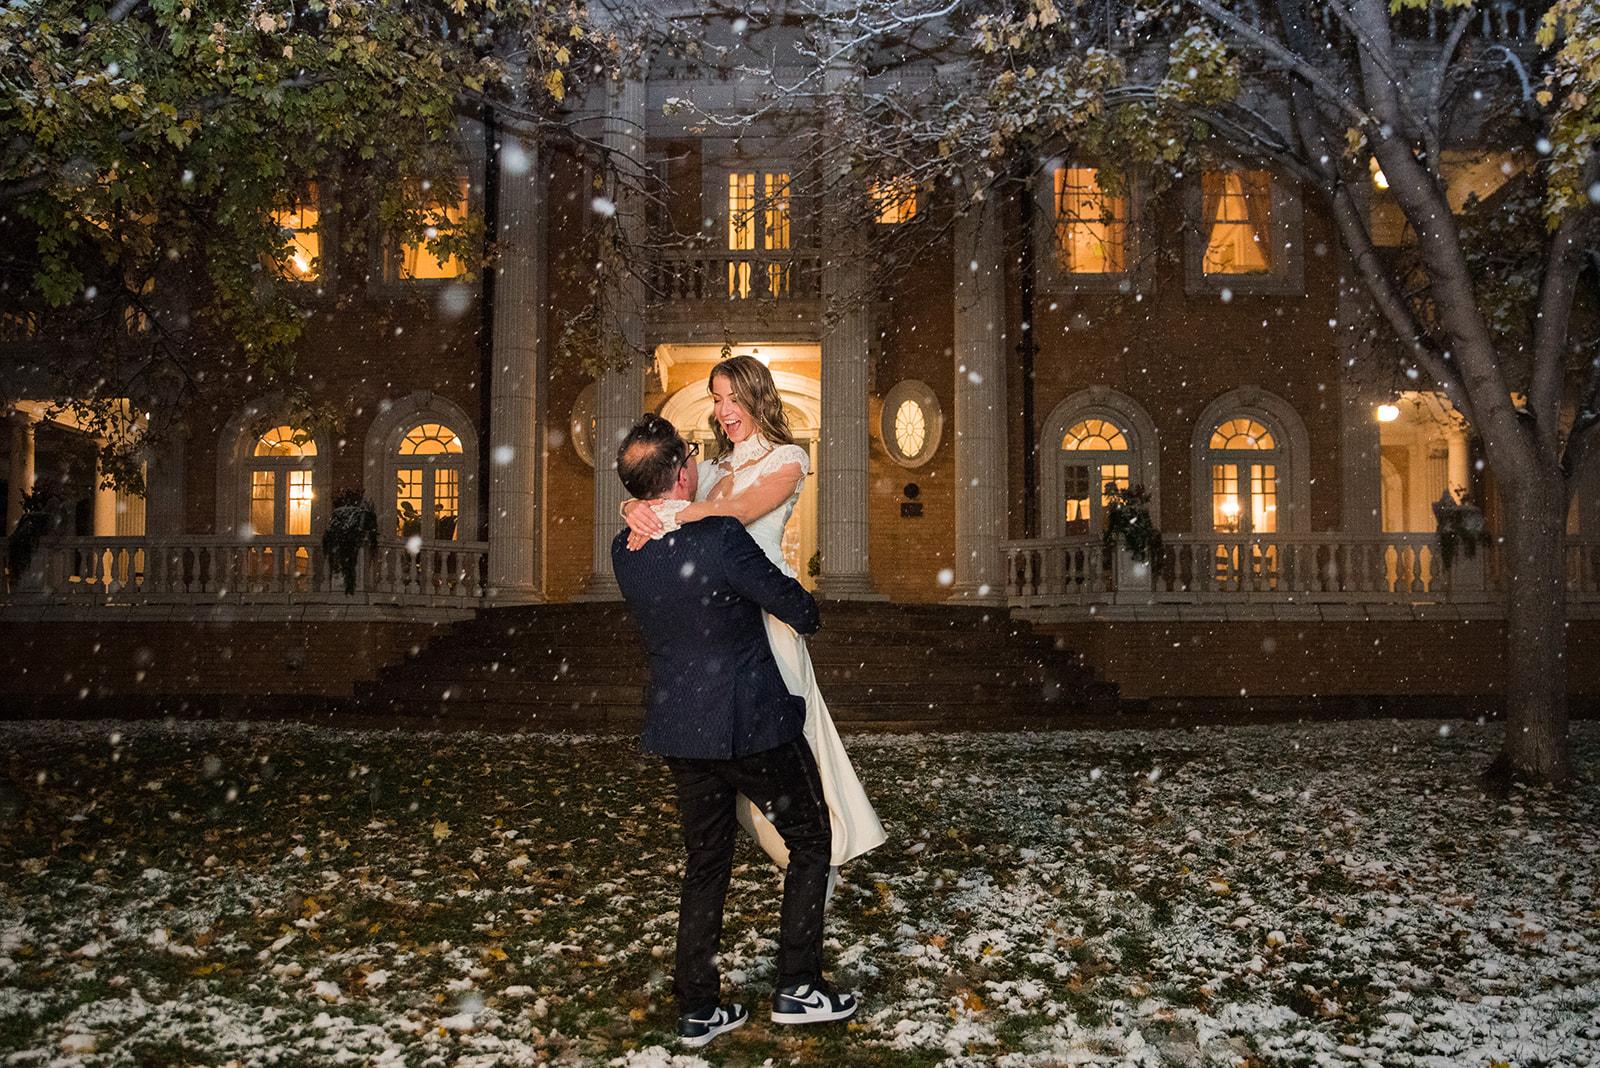 A groom lifts and spins his bride in the front lawn of the Grant Humphrey Mansion at night as snow falls around them.